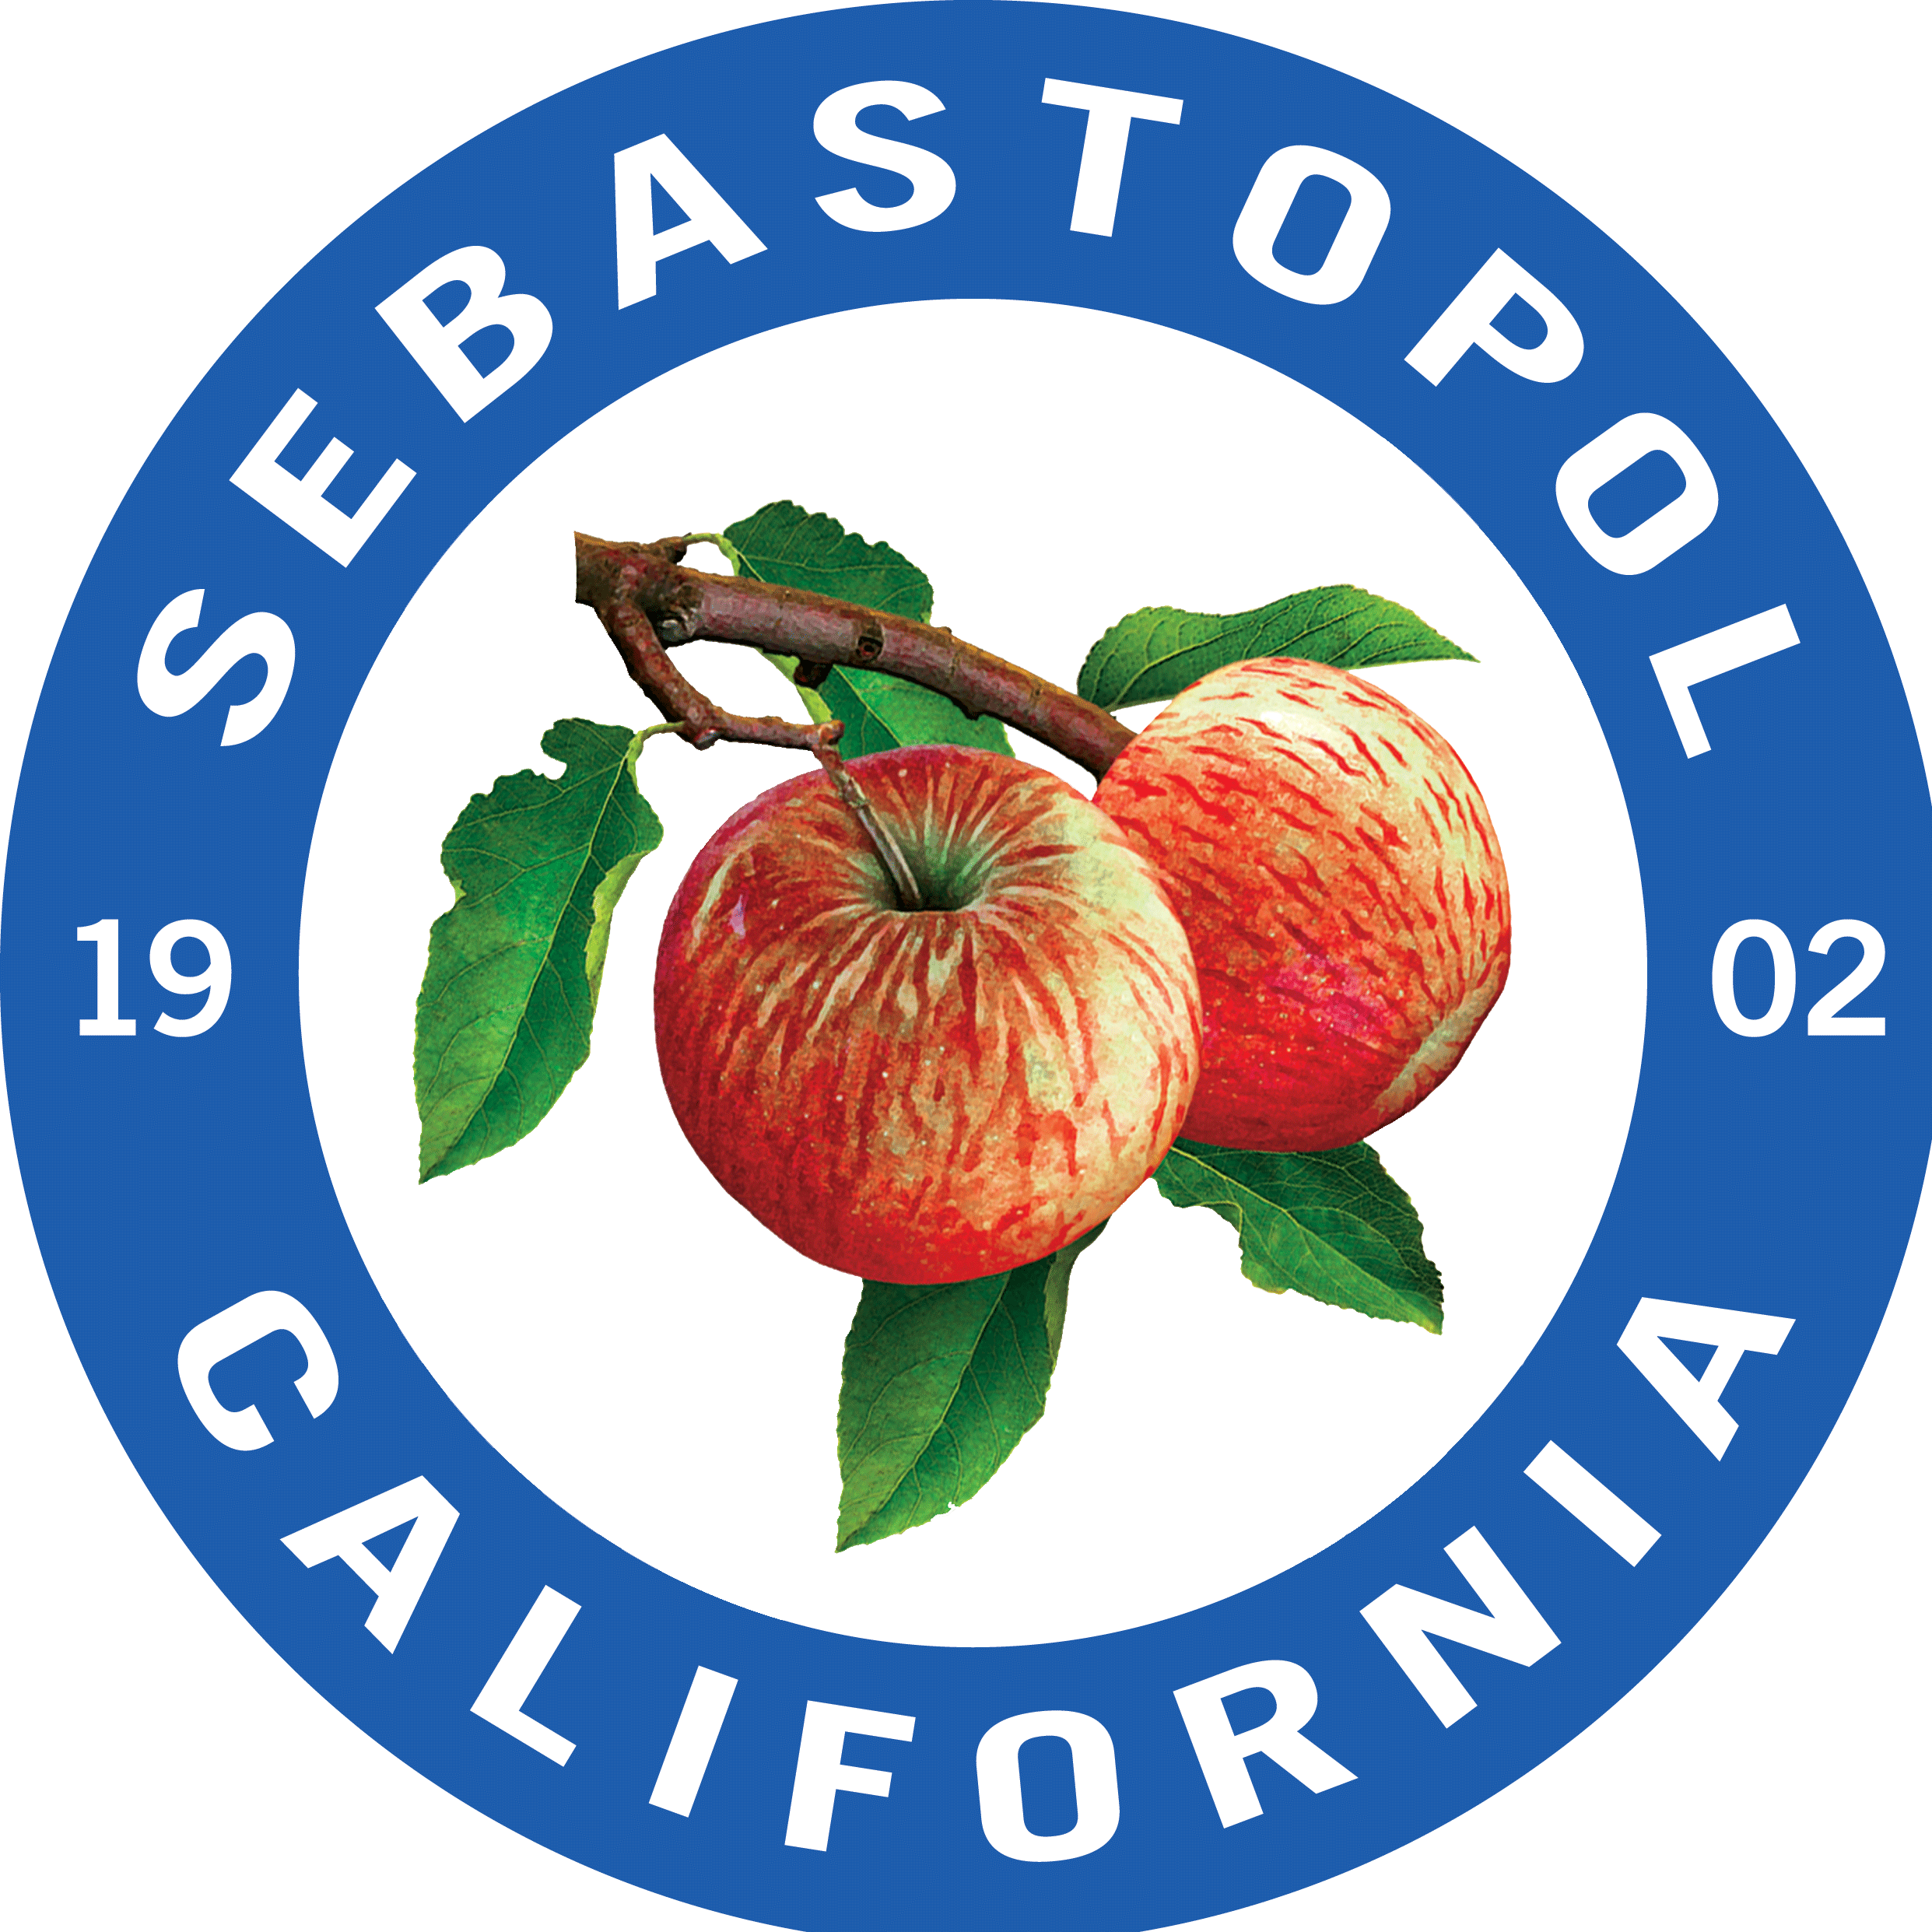 Seal of City of Sebastopol depicting two Gravenstein apples and 1902, the date of founding.